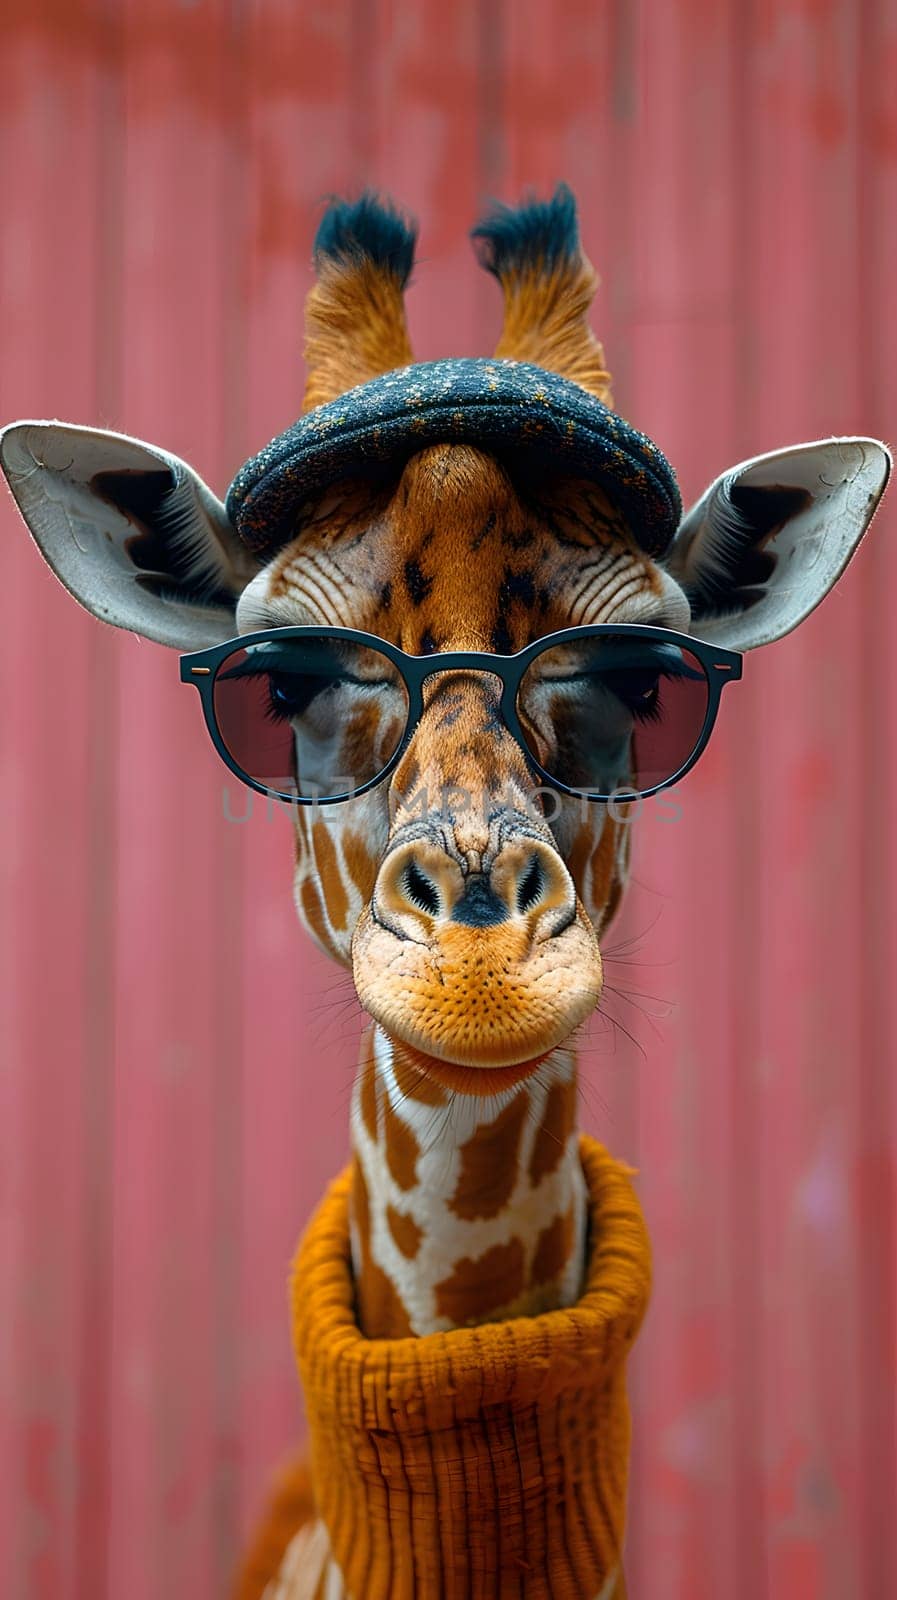 A giraffe, wearing sunglasses and a sweater, is standing in front of a red wall. The giraffes long neck and fawn colored fur stand out against the vibrant background